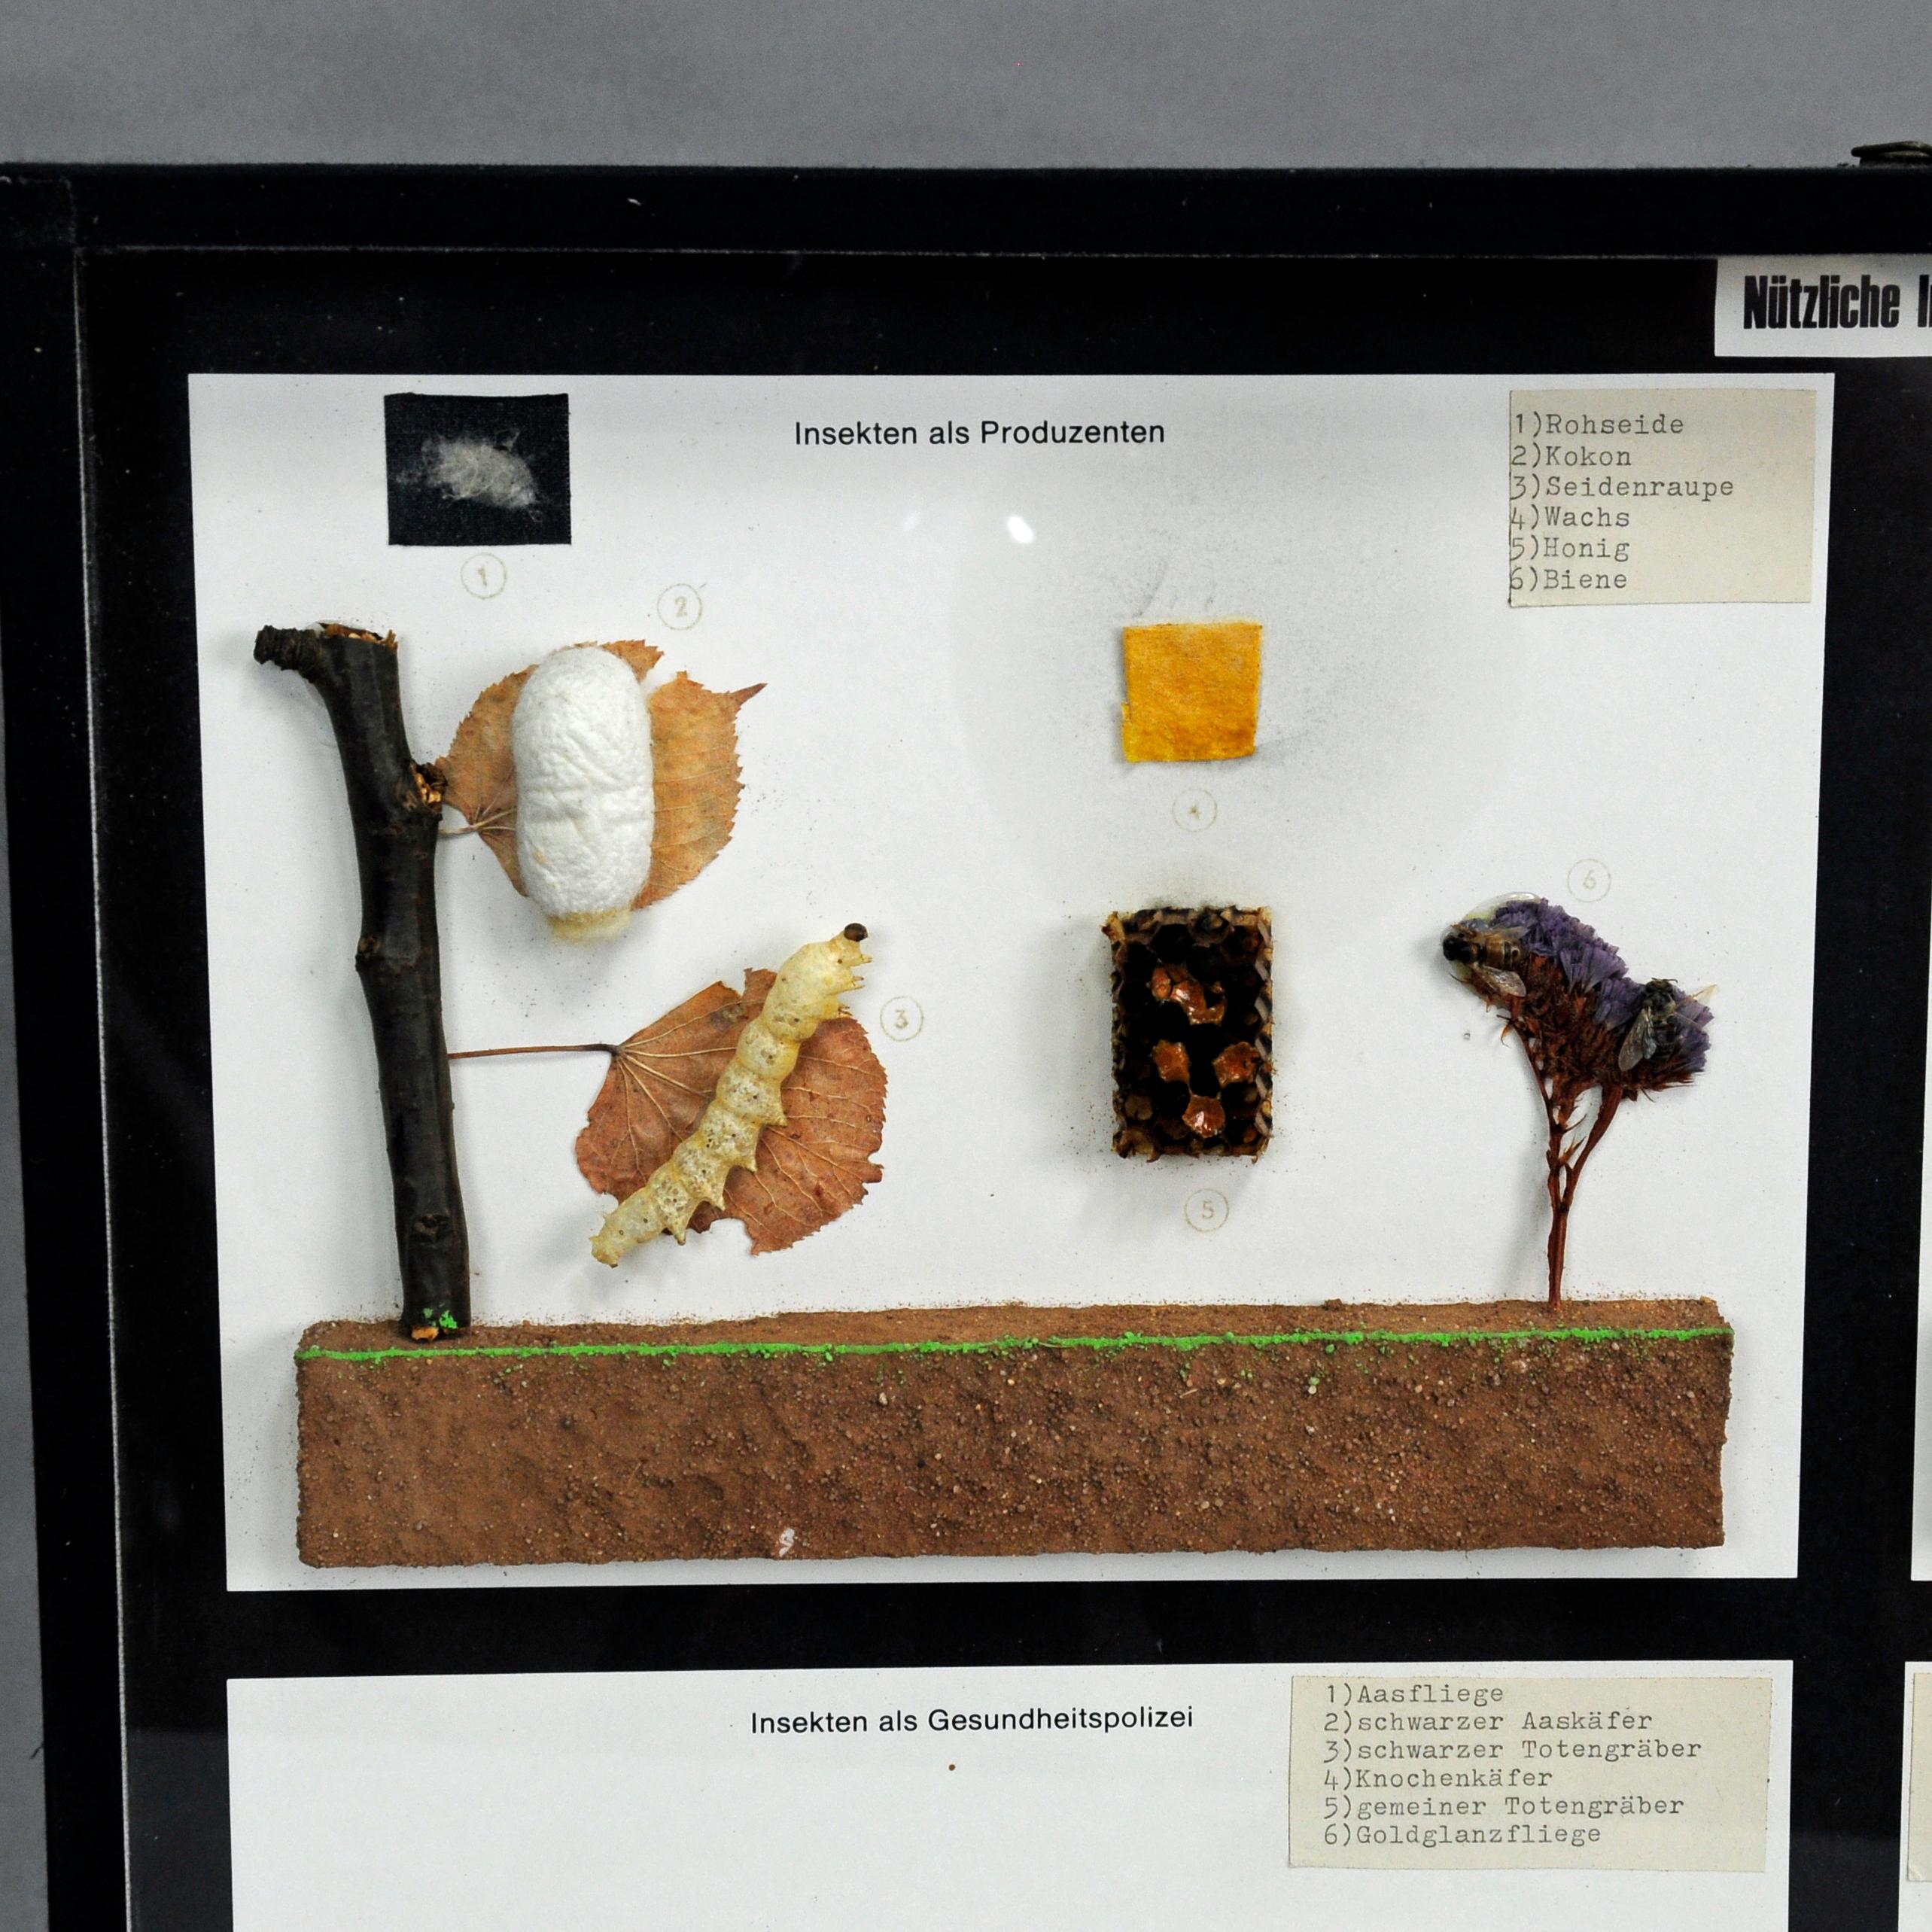 A classical vintage school teaching showcase with specimen illustrating usefull insects (insects as producers, insects pollinating flowers, insect sanitary police and insects annihilating pests). Used as teaching material in German schools, circa